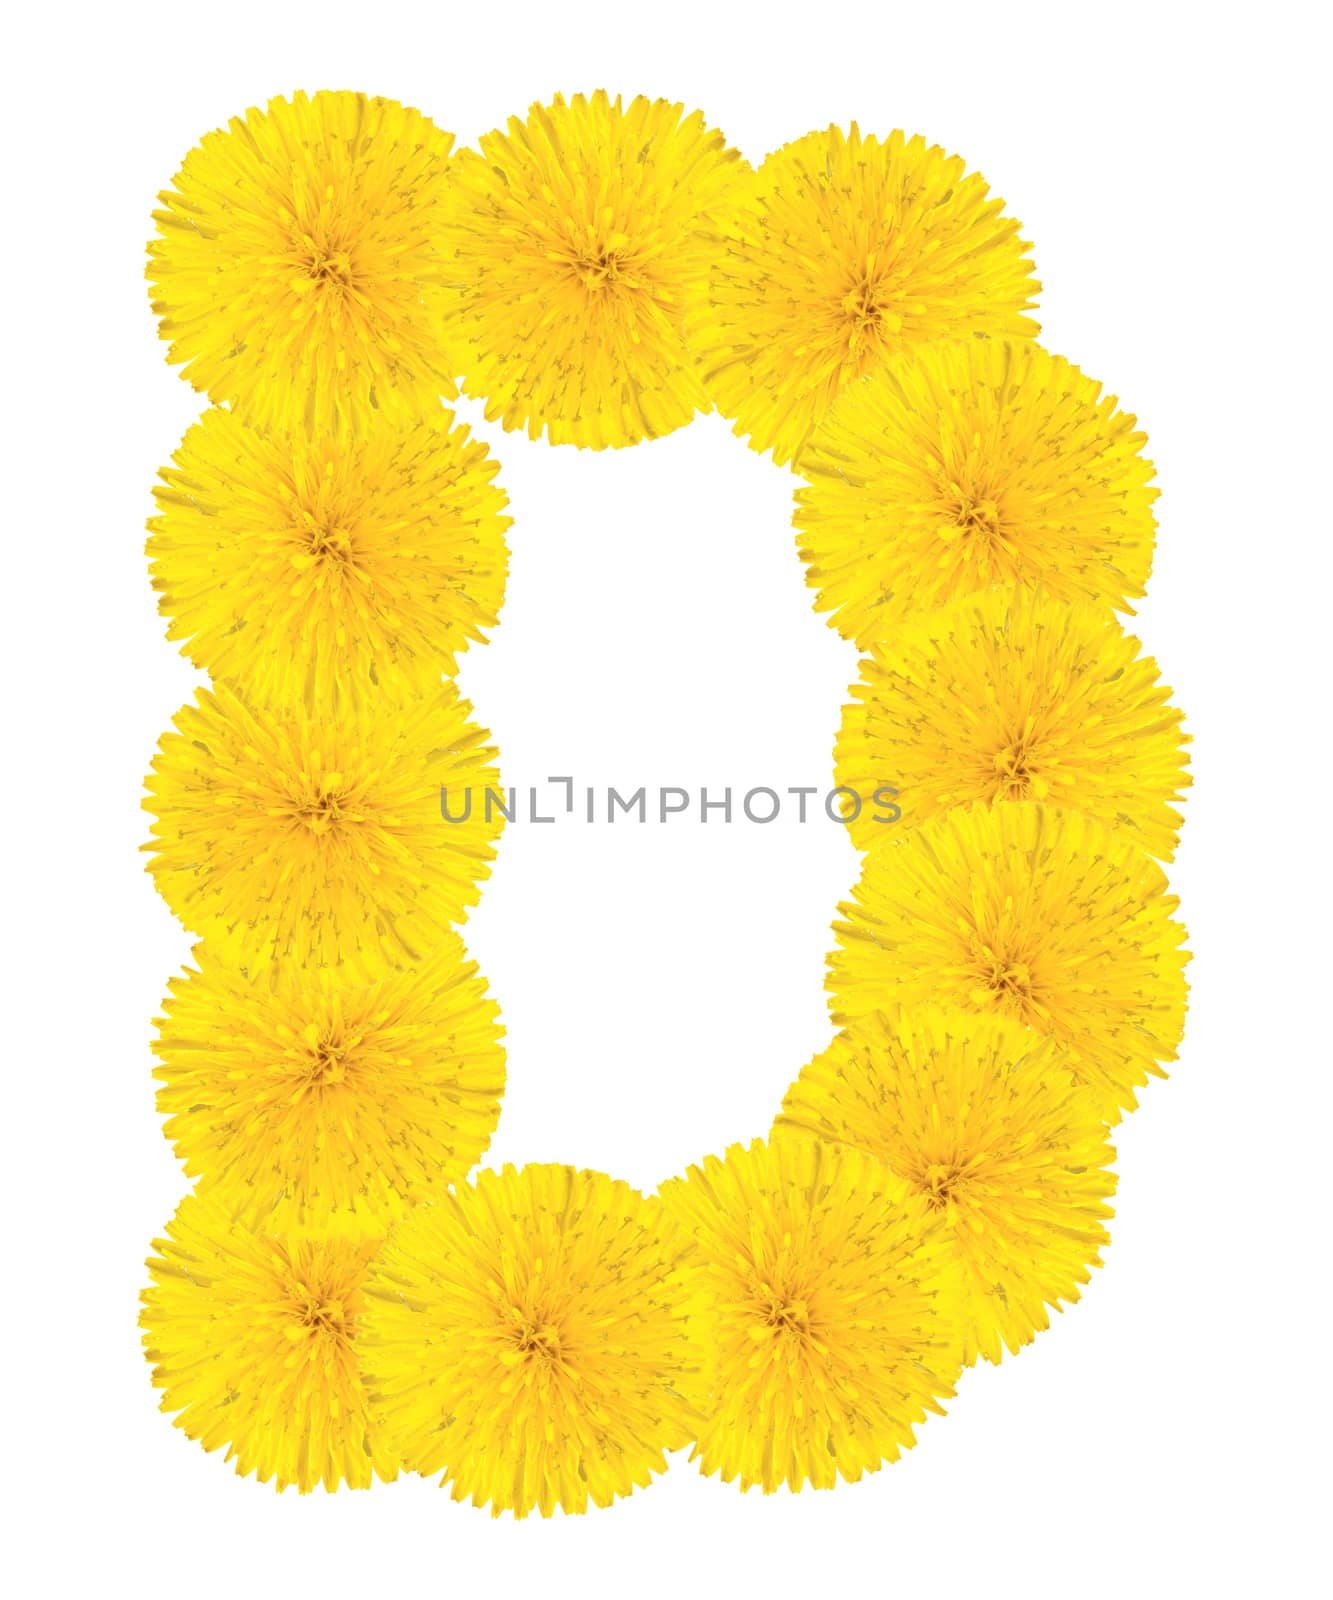 Letter D made from dandelions by Valengilda